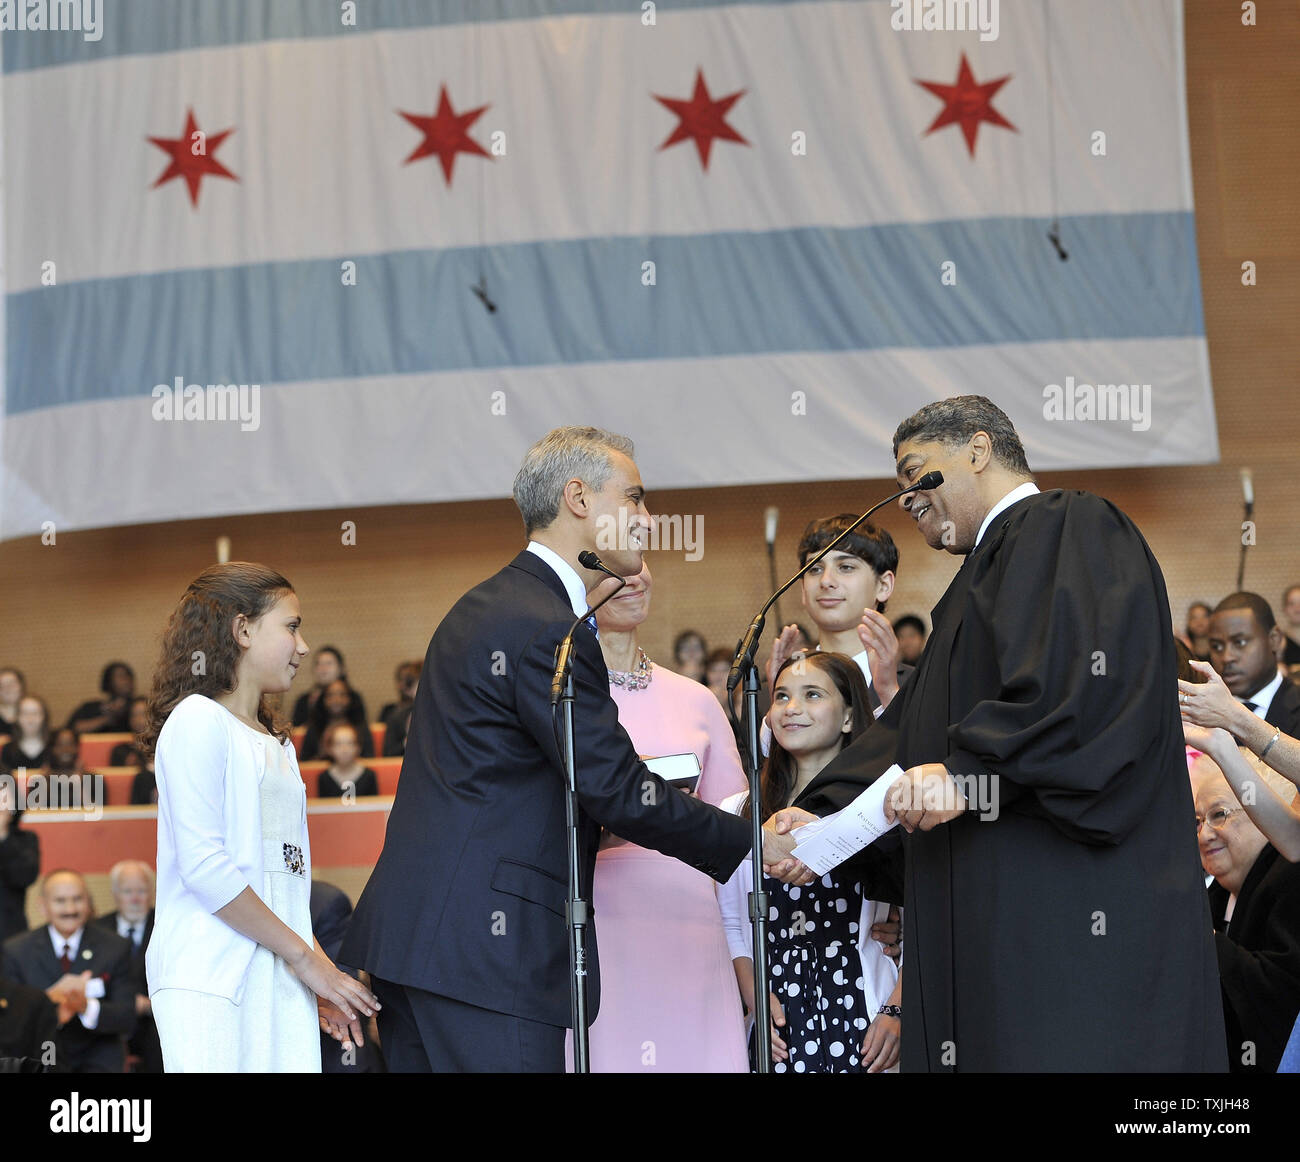 Rahm Emanuel (second left), accompanied by his daughter Ilana (L-R), wife Amy Rule, daughter Leah and son Zach, shakes hands with Cook County Circuit Court Judge Timothy Evans (R) after taking the oath of office during an inaugural ceremony at Millennium Park on May 16, 2011. Emanuel takes over for Richard M. Daley, who had served in the post since 1989.     UPI/Brian Kersey Stock Photo